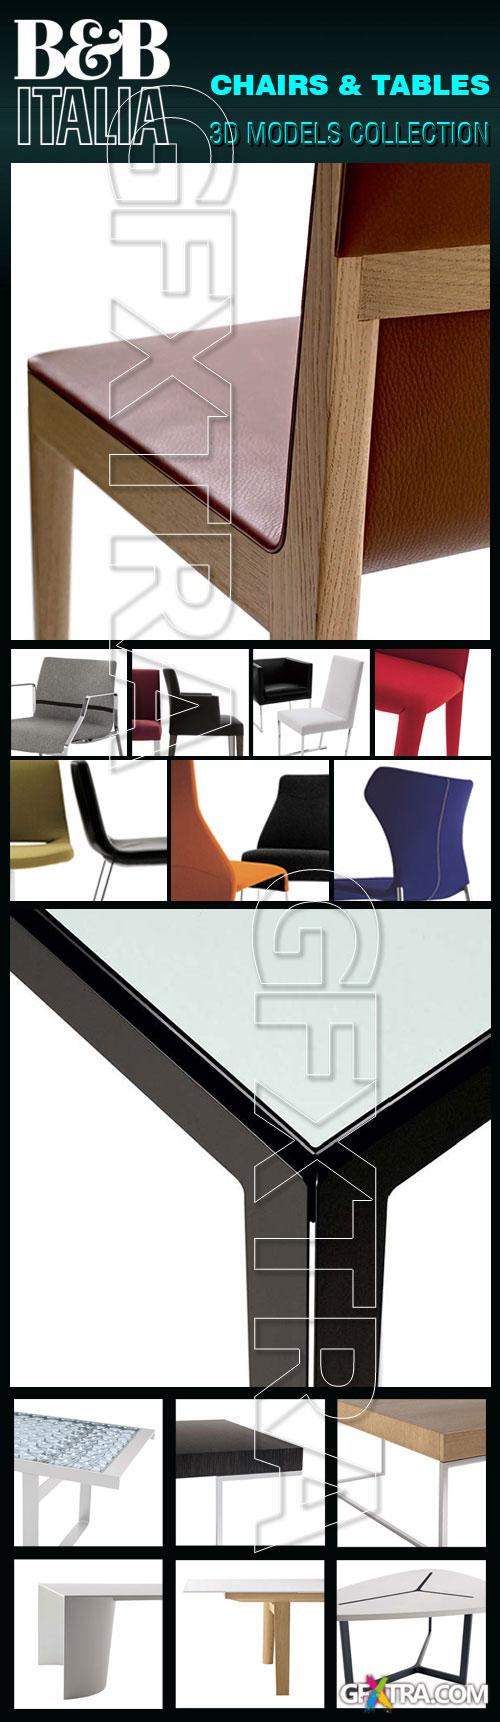 B&B Italia Furnitures - Tables, Chairs and Accessories 3D Model Collection